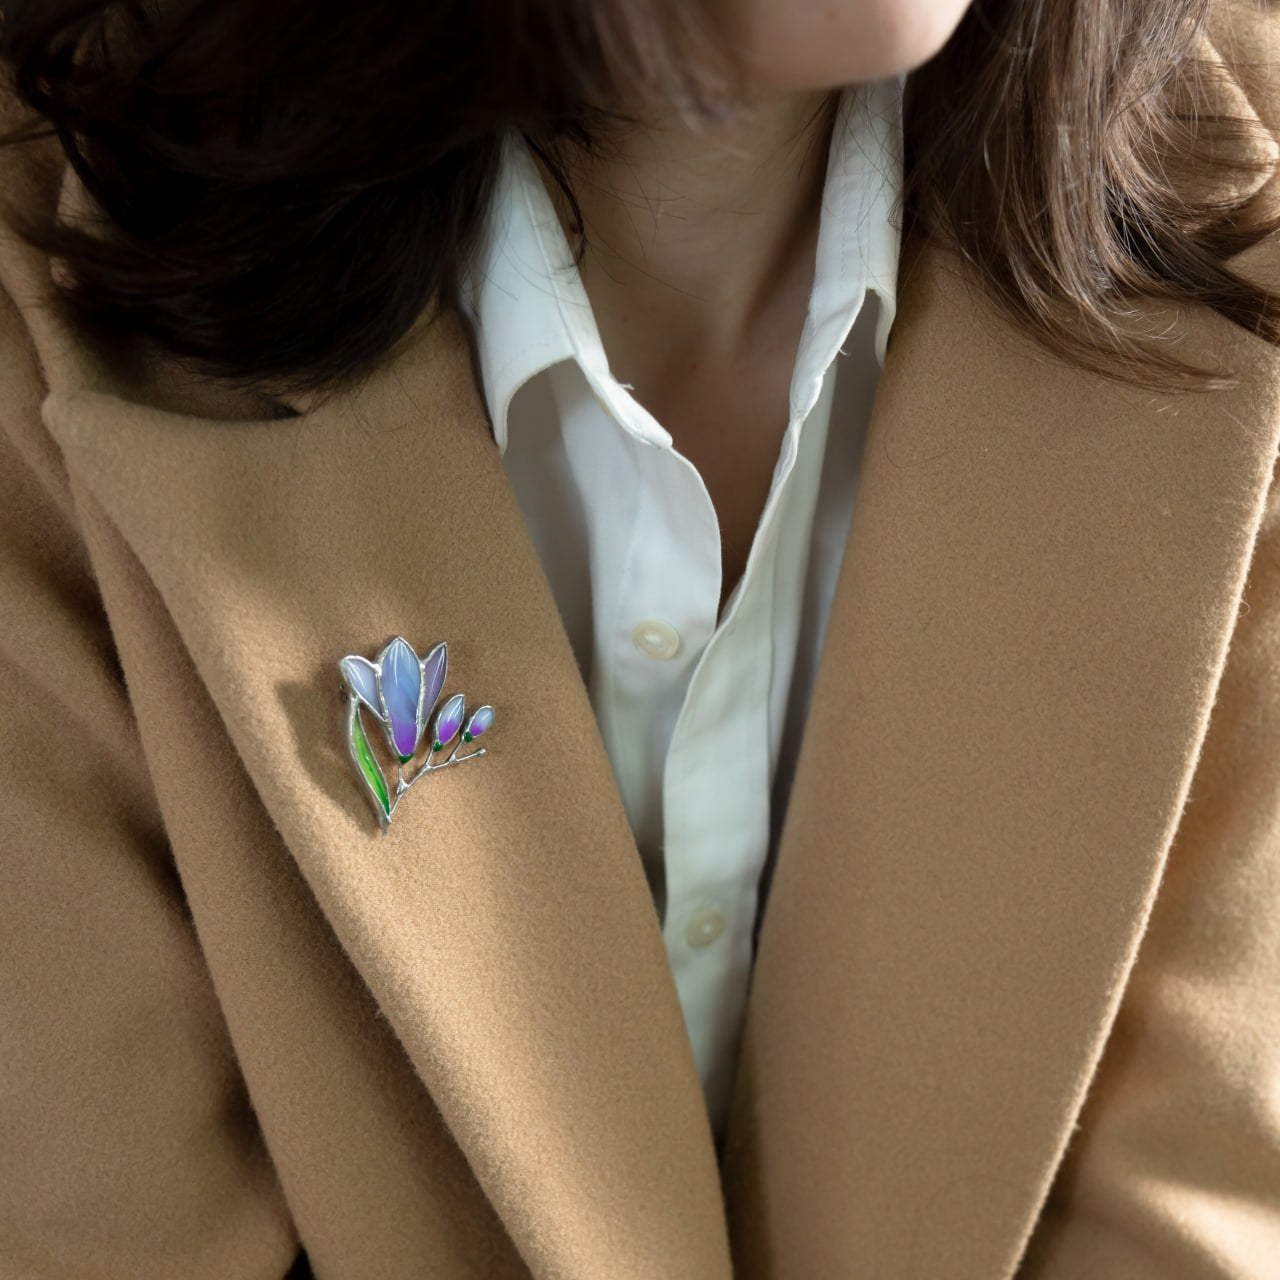 Freesia flower stained glass brooch on a camel coat